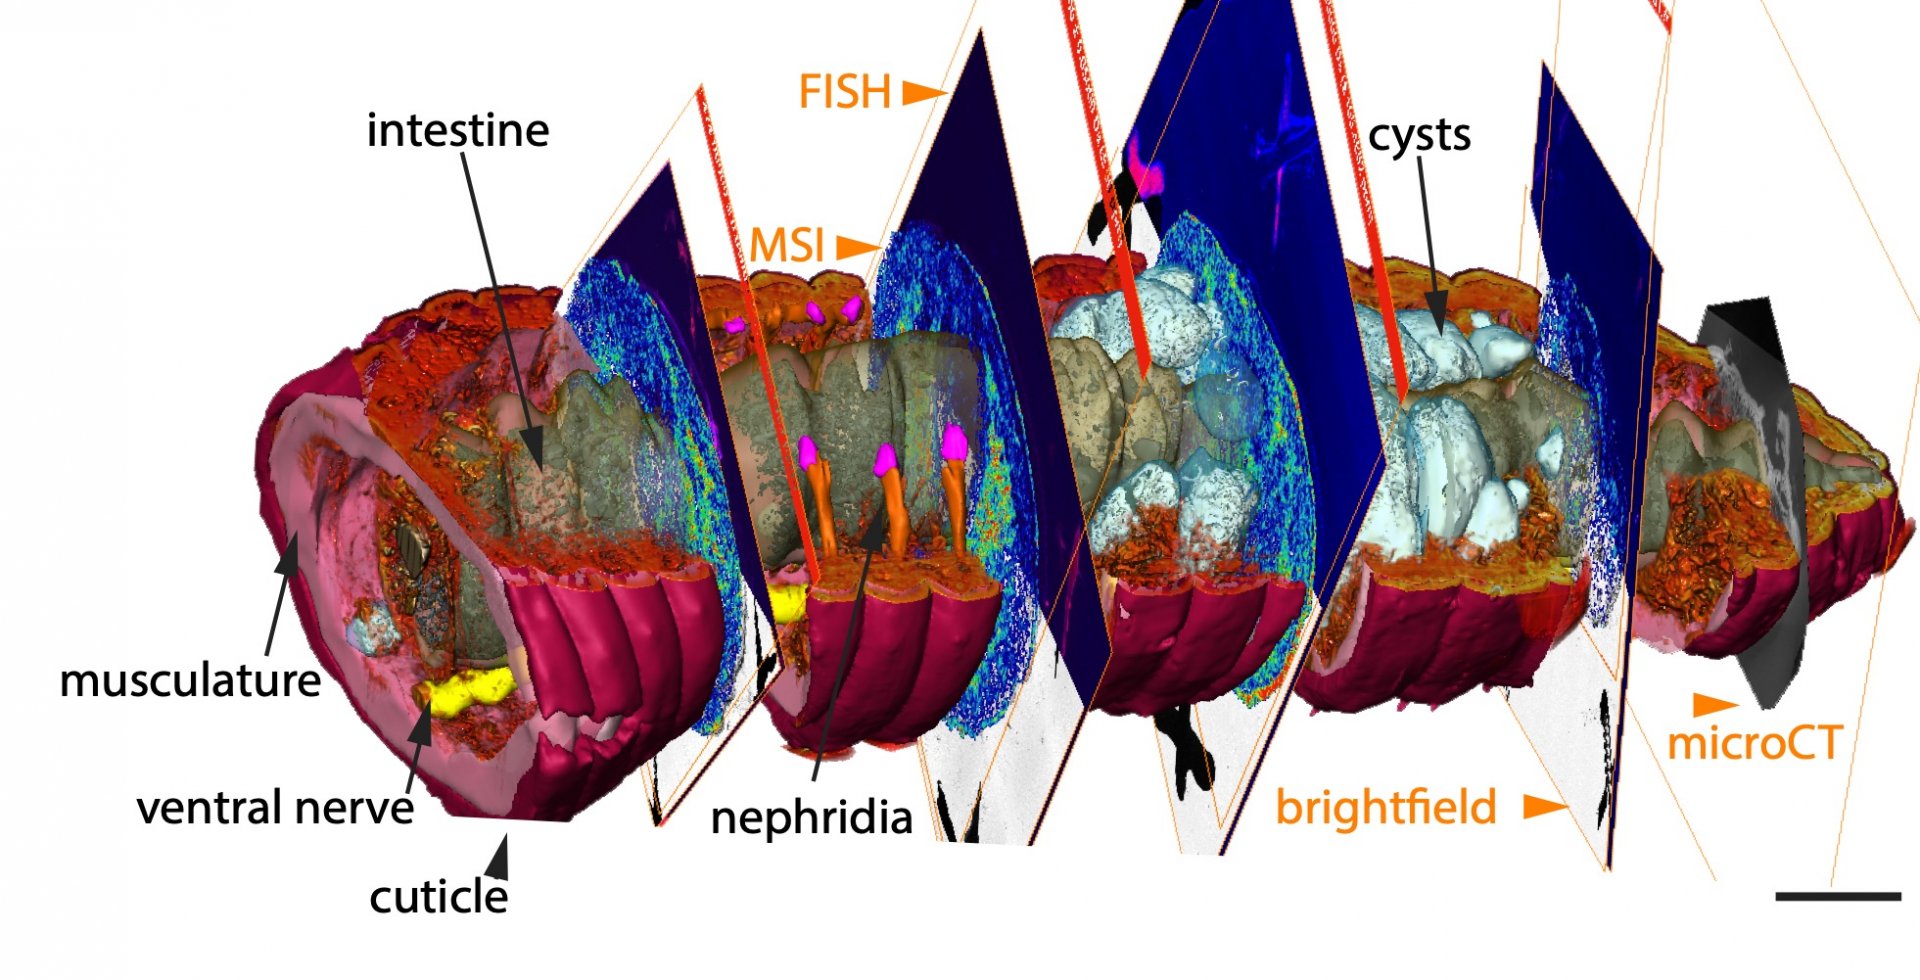 3D CHEMHIST atlas or the posterior end of an earthworm, used in this study. The atlas combines data of mass spectrometry imaging (MSI), fluorescence in situ hybridization (FISH) and microtomography (micro-CT).